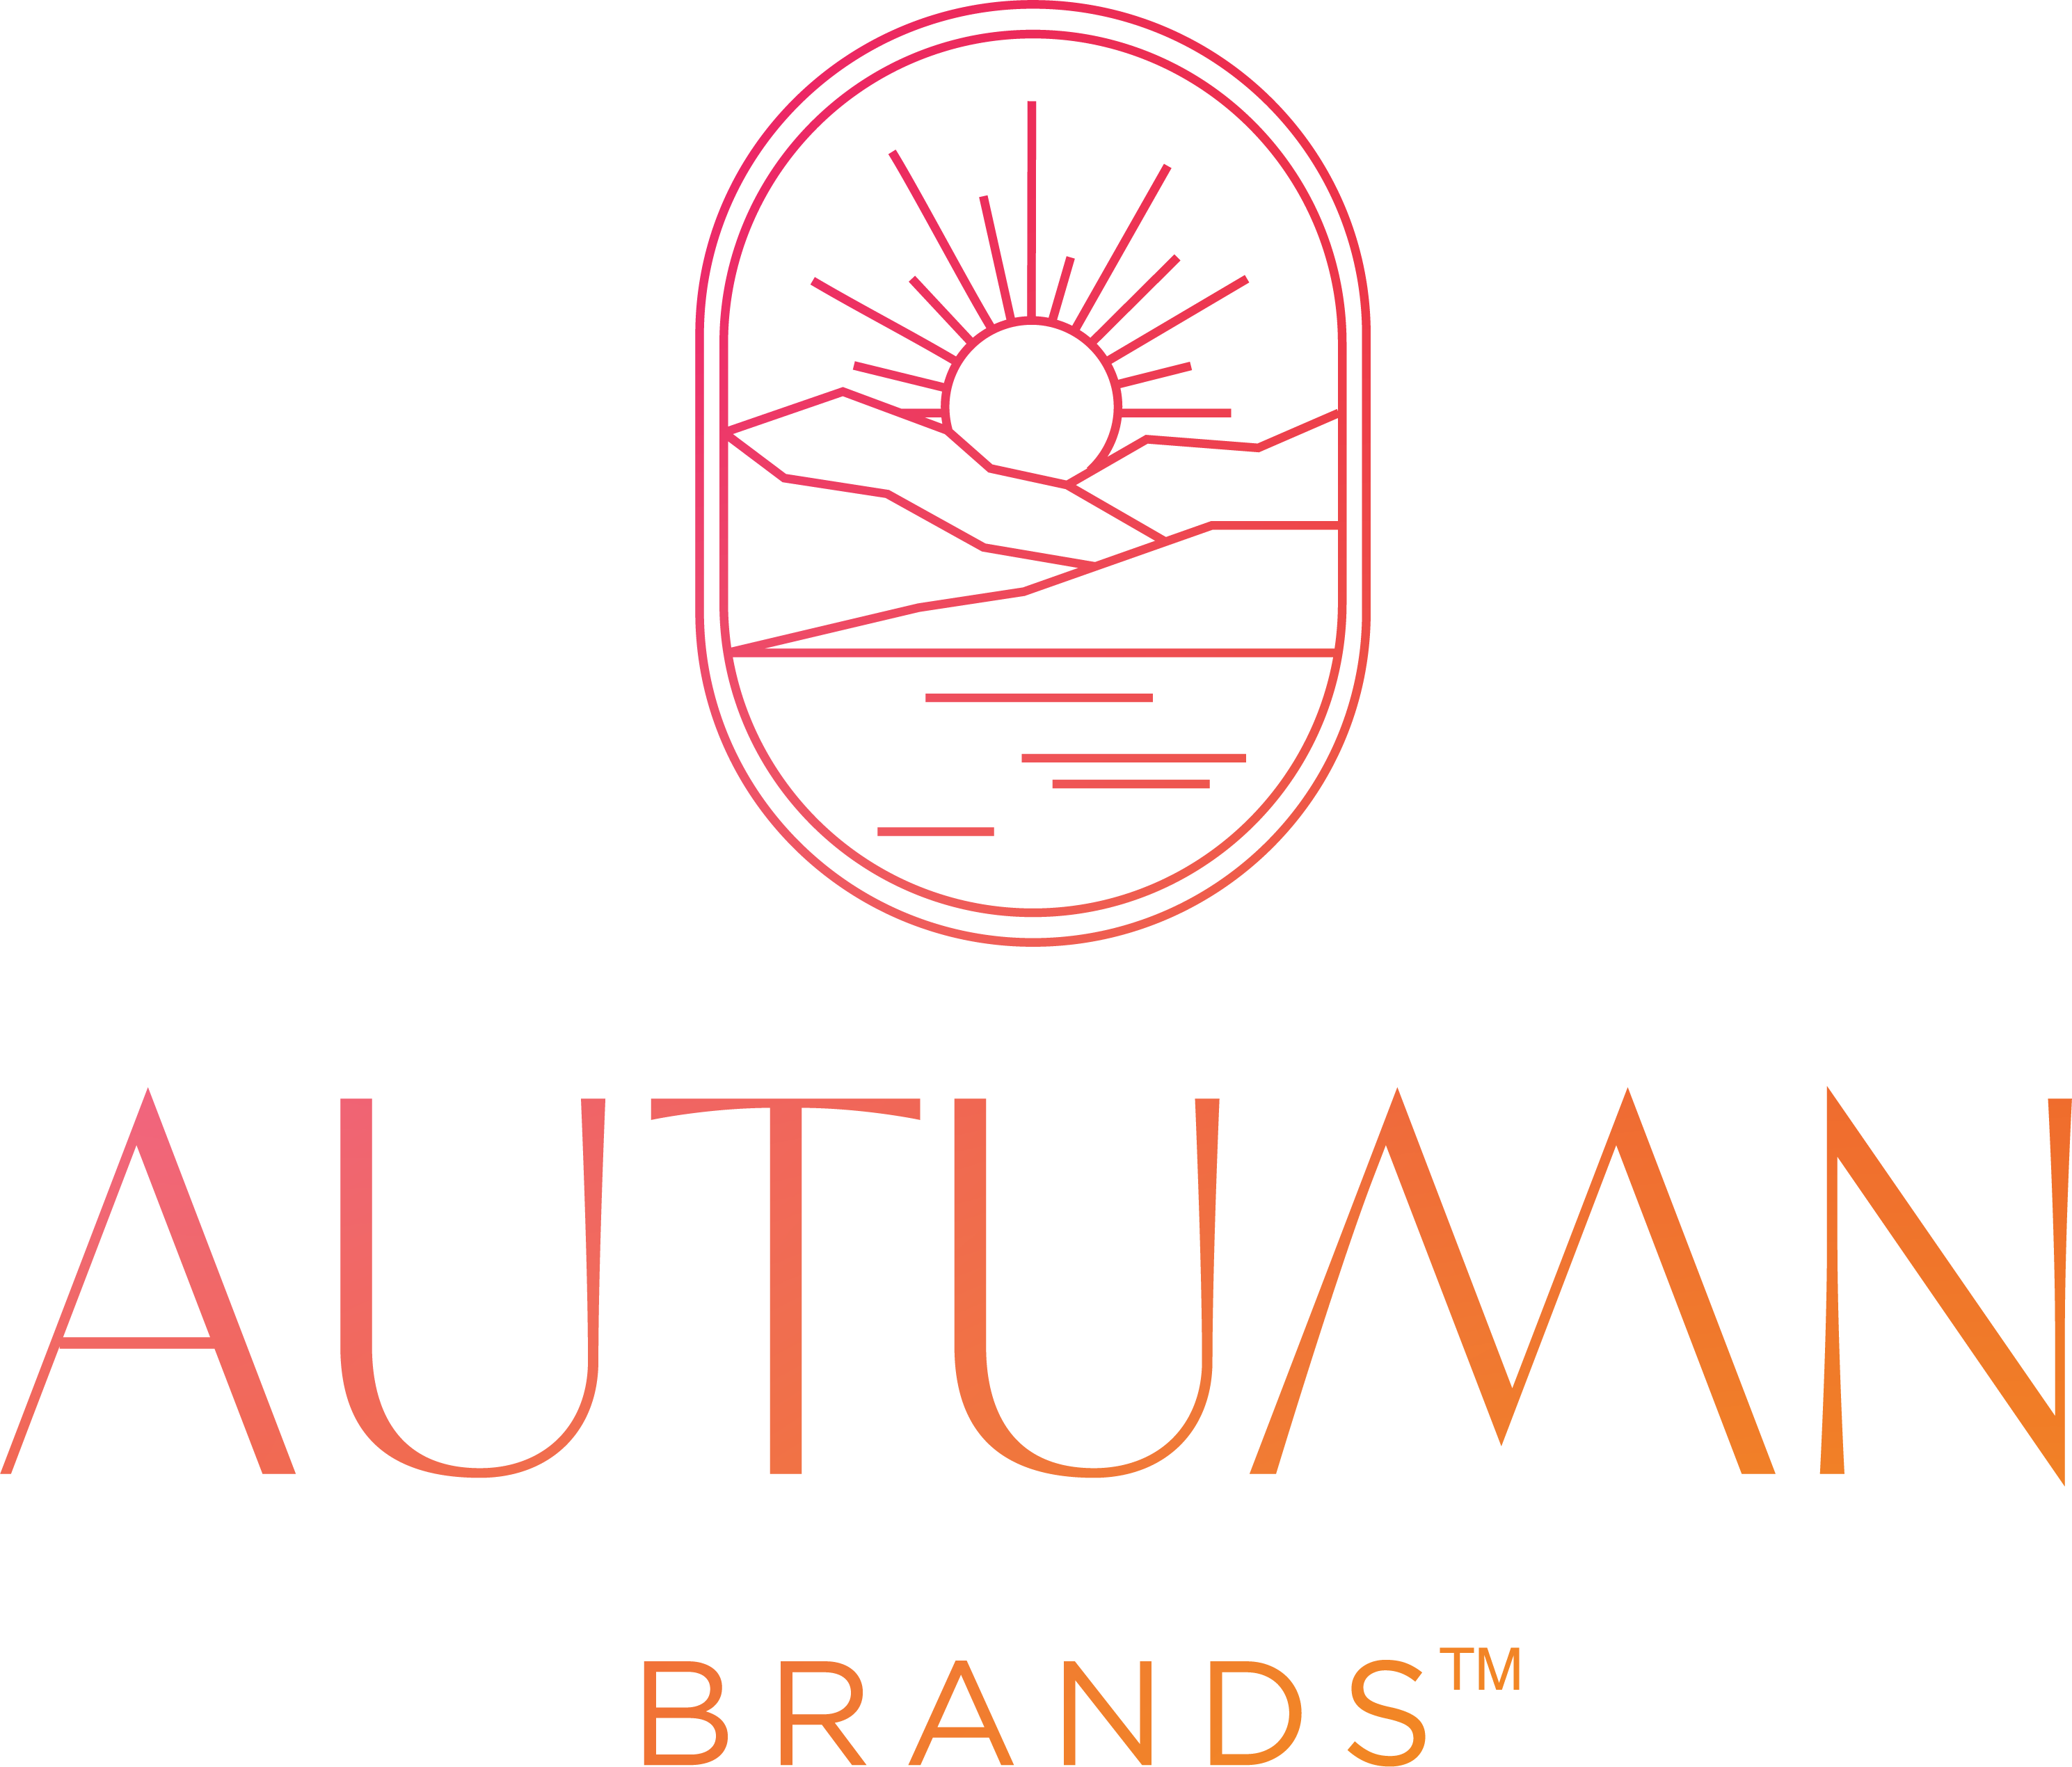 The logo of Autumn Brands